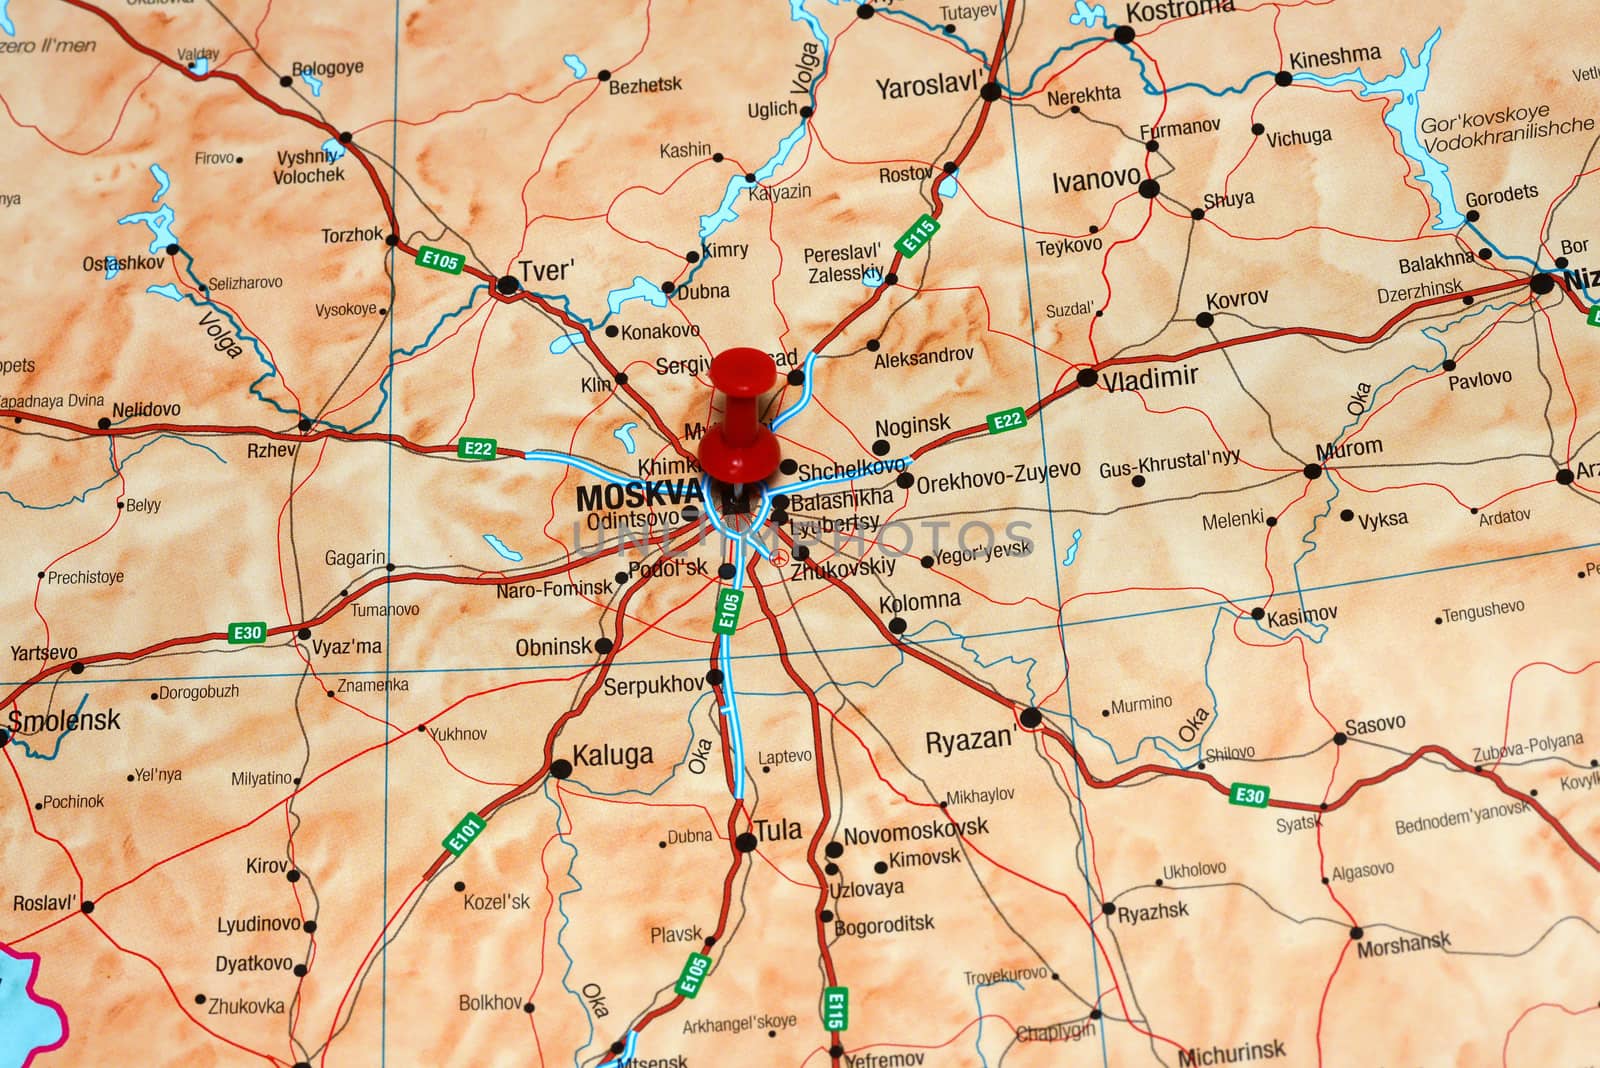 Photo of pinned Moscow on a map of europe. May be used as illustration for traveling theme.